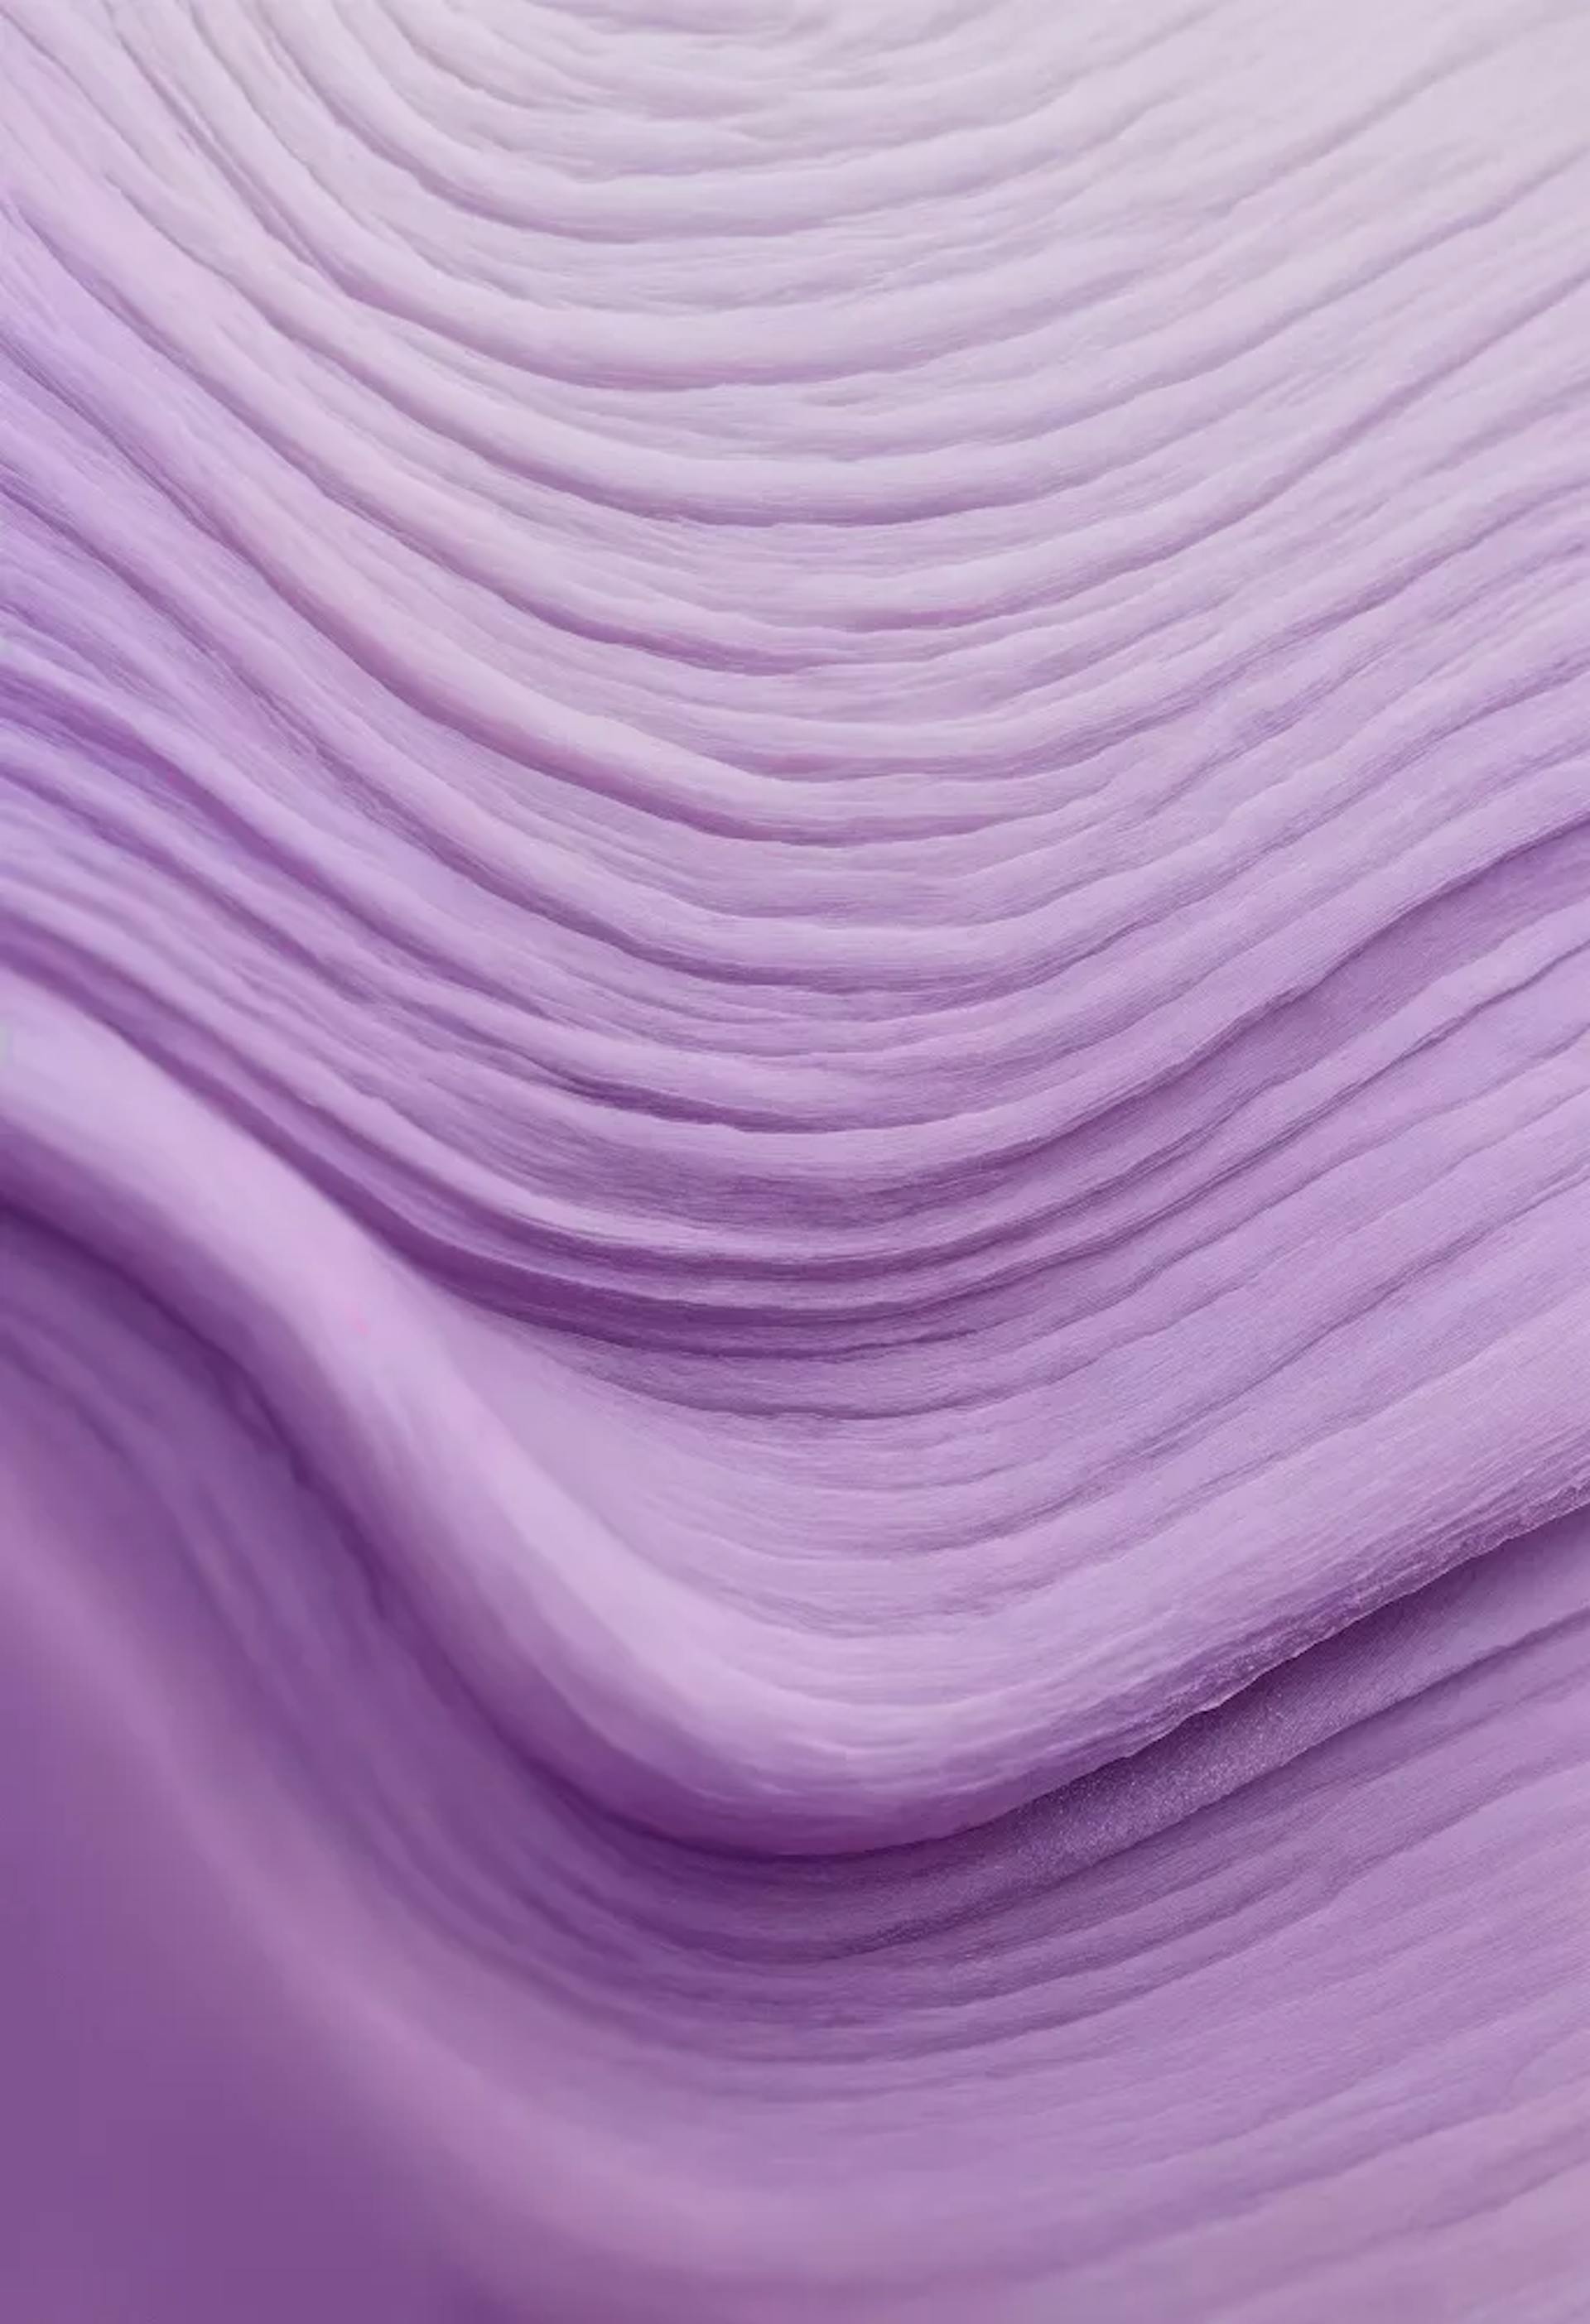 Lavender abstract that gives an impression of depth and dimension